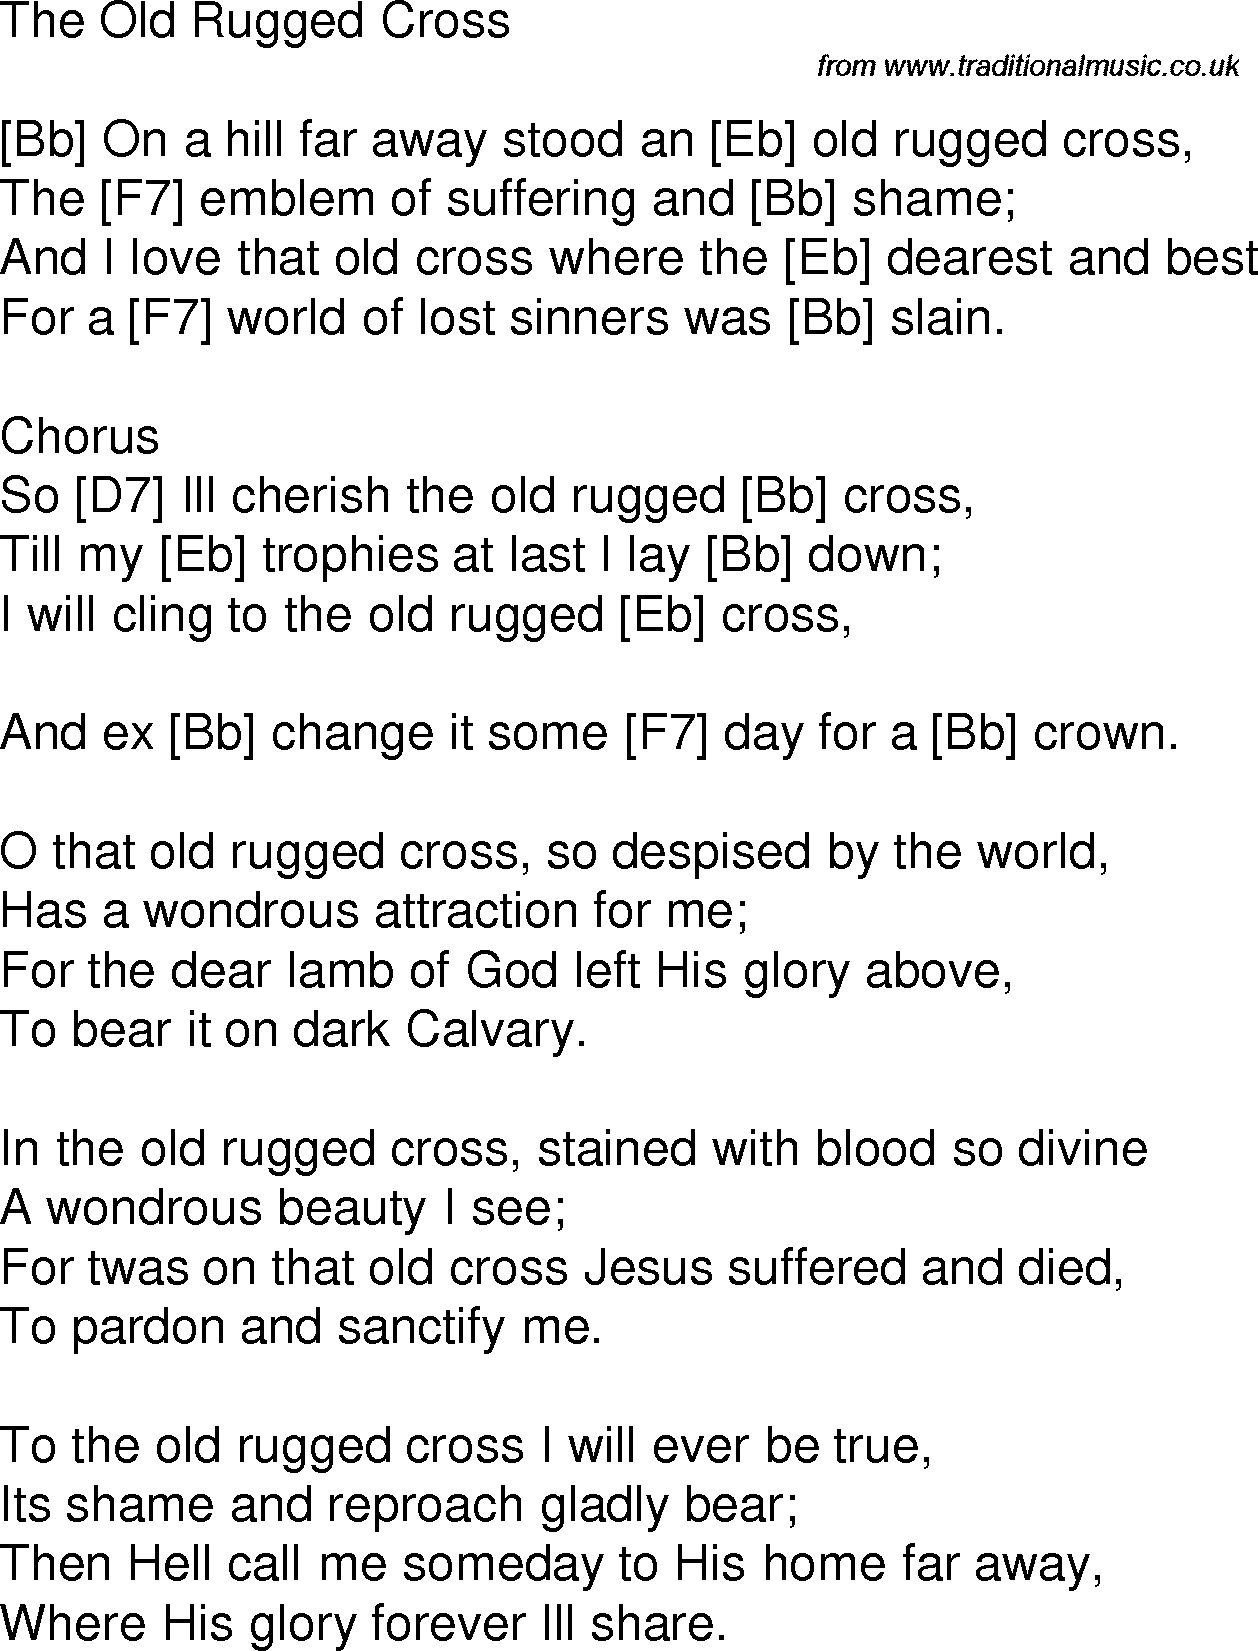 Old time song lyrics with chords for The Old Rugged Cross Bb